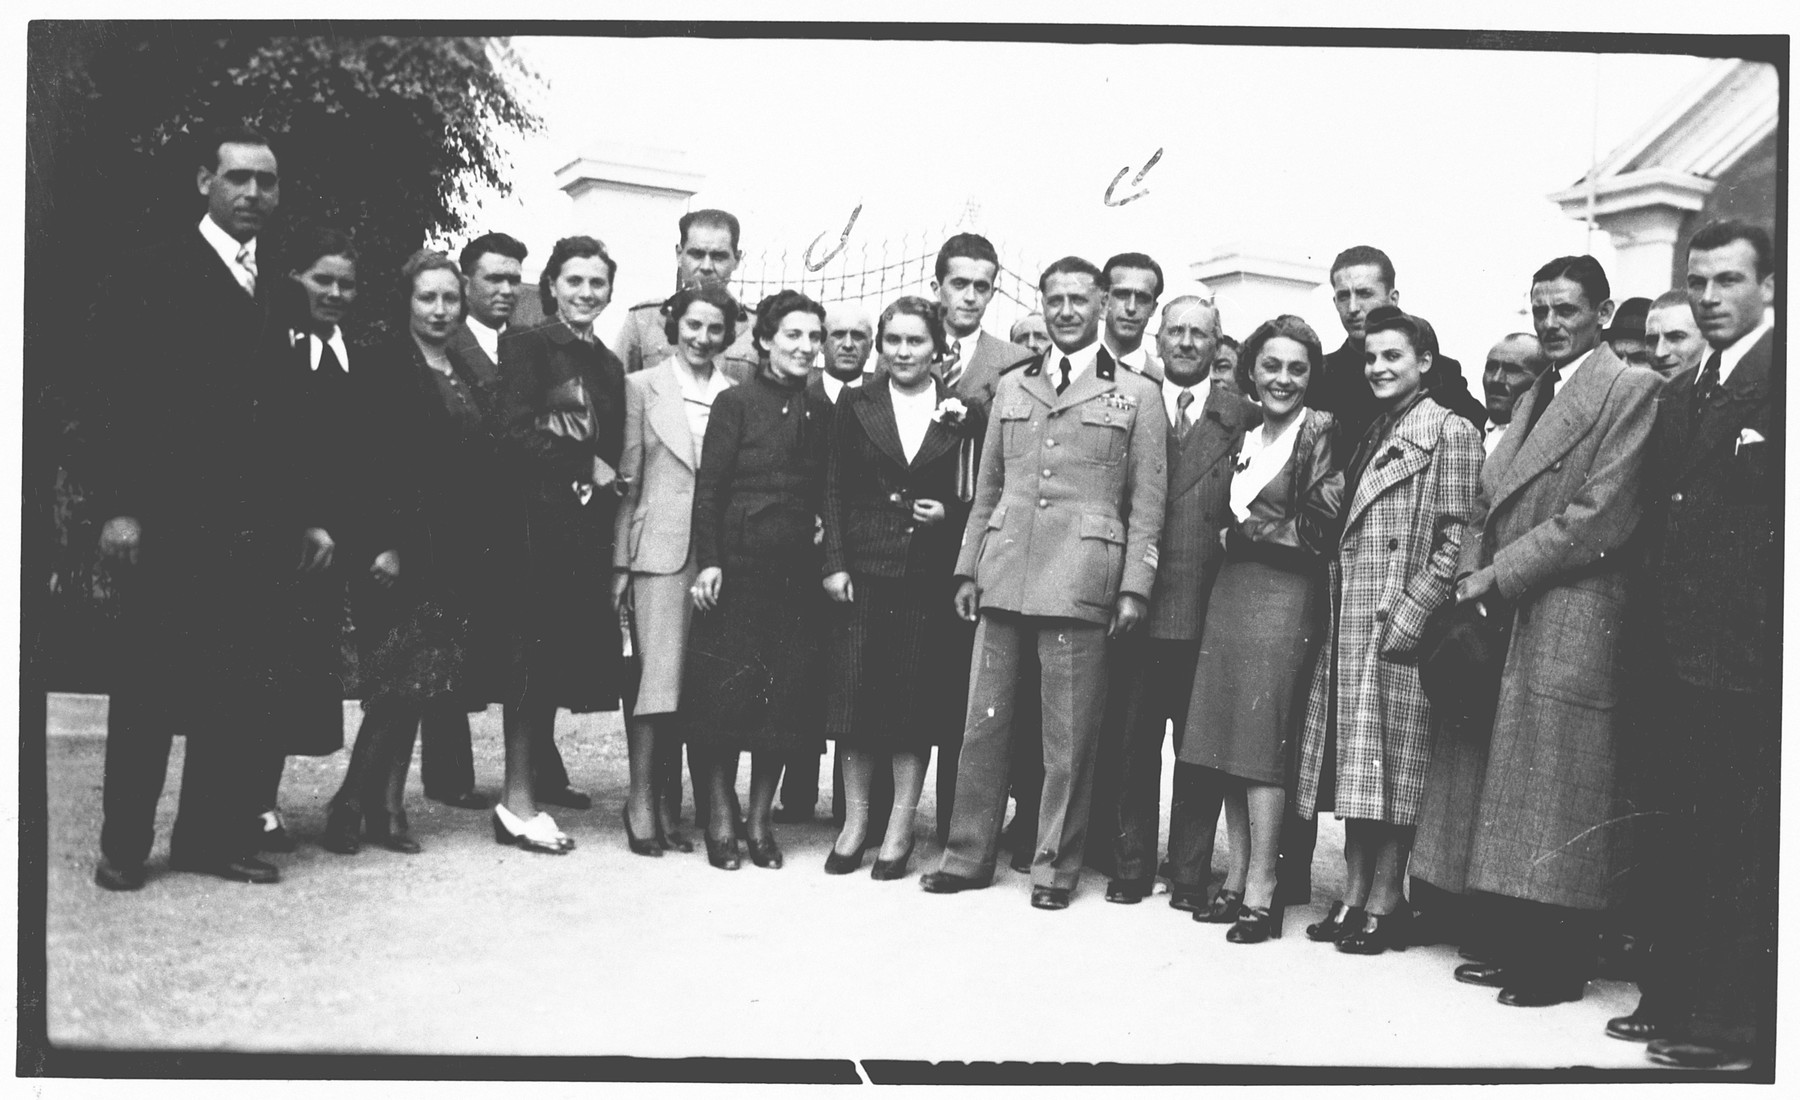 Aldo Foa poses with his co-workers from the army laboratory while on an office trip.

The workers presented this photograph to Aldo Foa as a going-away momento after Foa was fired from his post as a result of the discriminatory laws of 1938.

The inscription on the back of the photograph reads, "In memory of the beautiful trip; the workers of the separated Noceto's department give this album to their director Colonel Cavalier Aldo Foa who promoted it and made it possible."